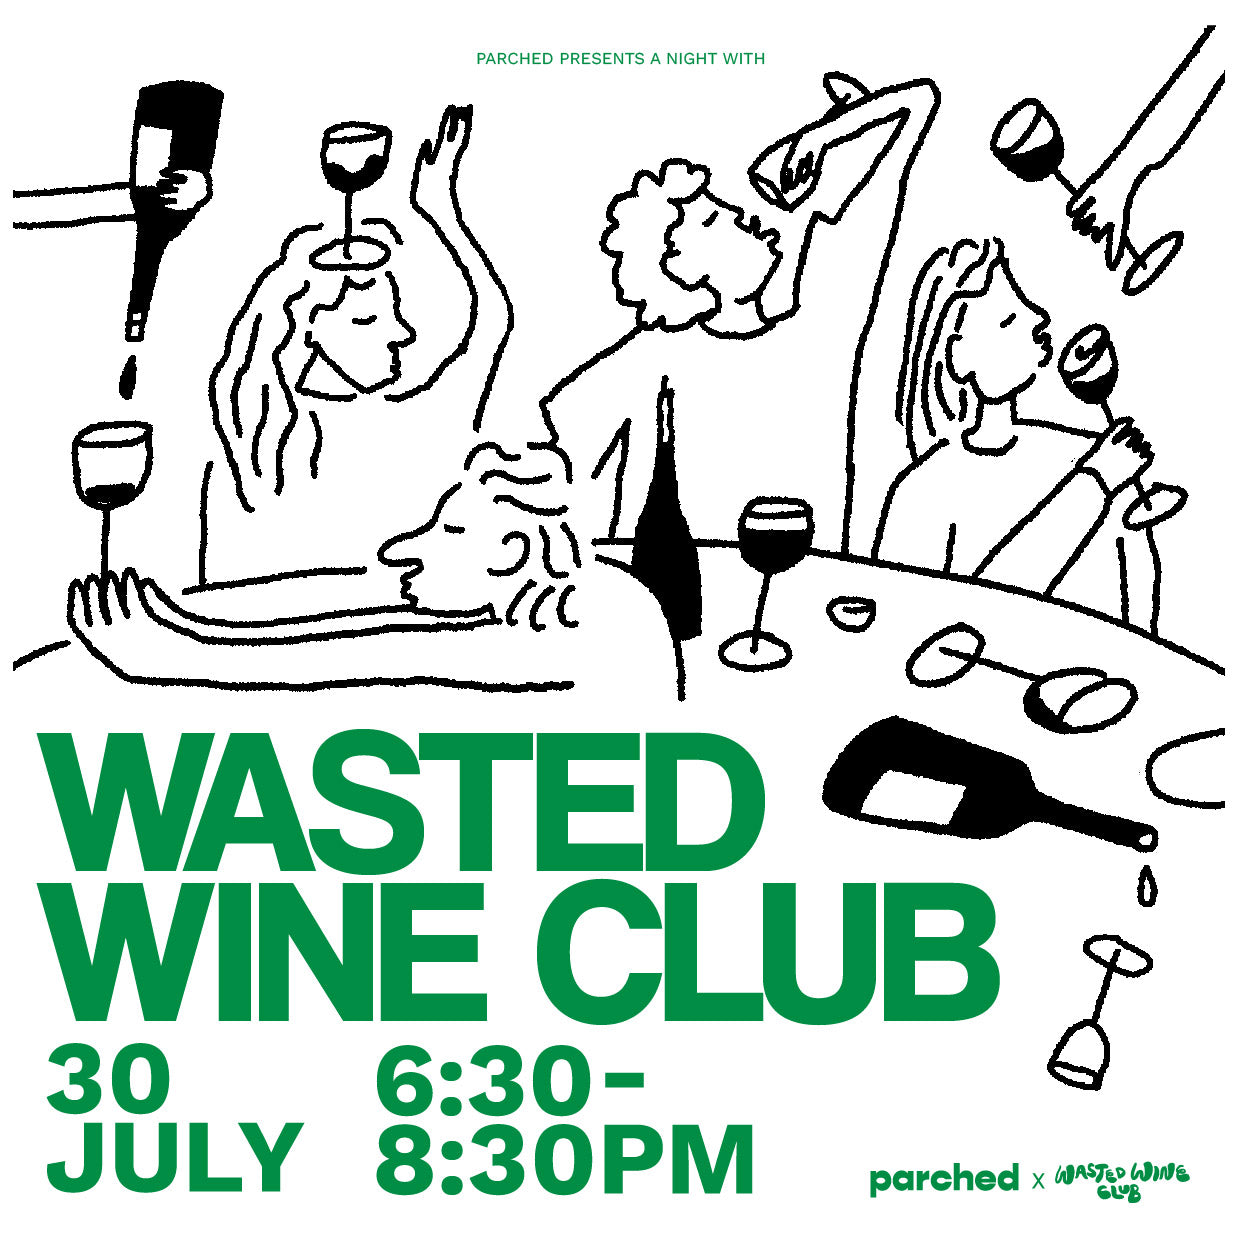 .... Parched + Dan's present: A Night with Wasted Wine Club